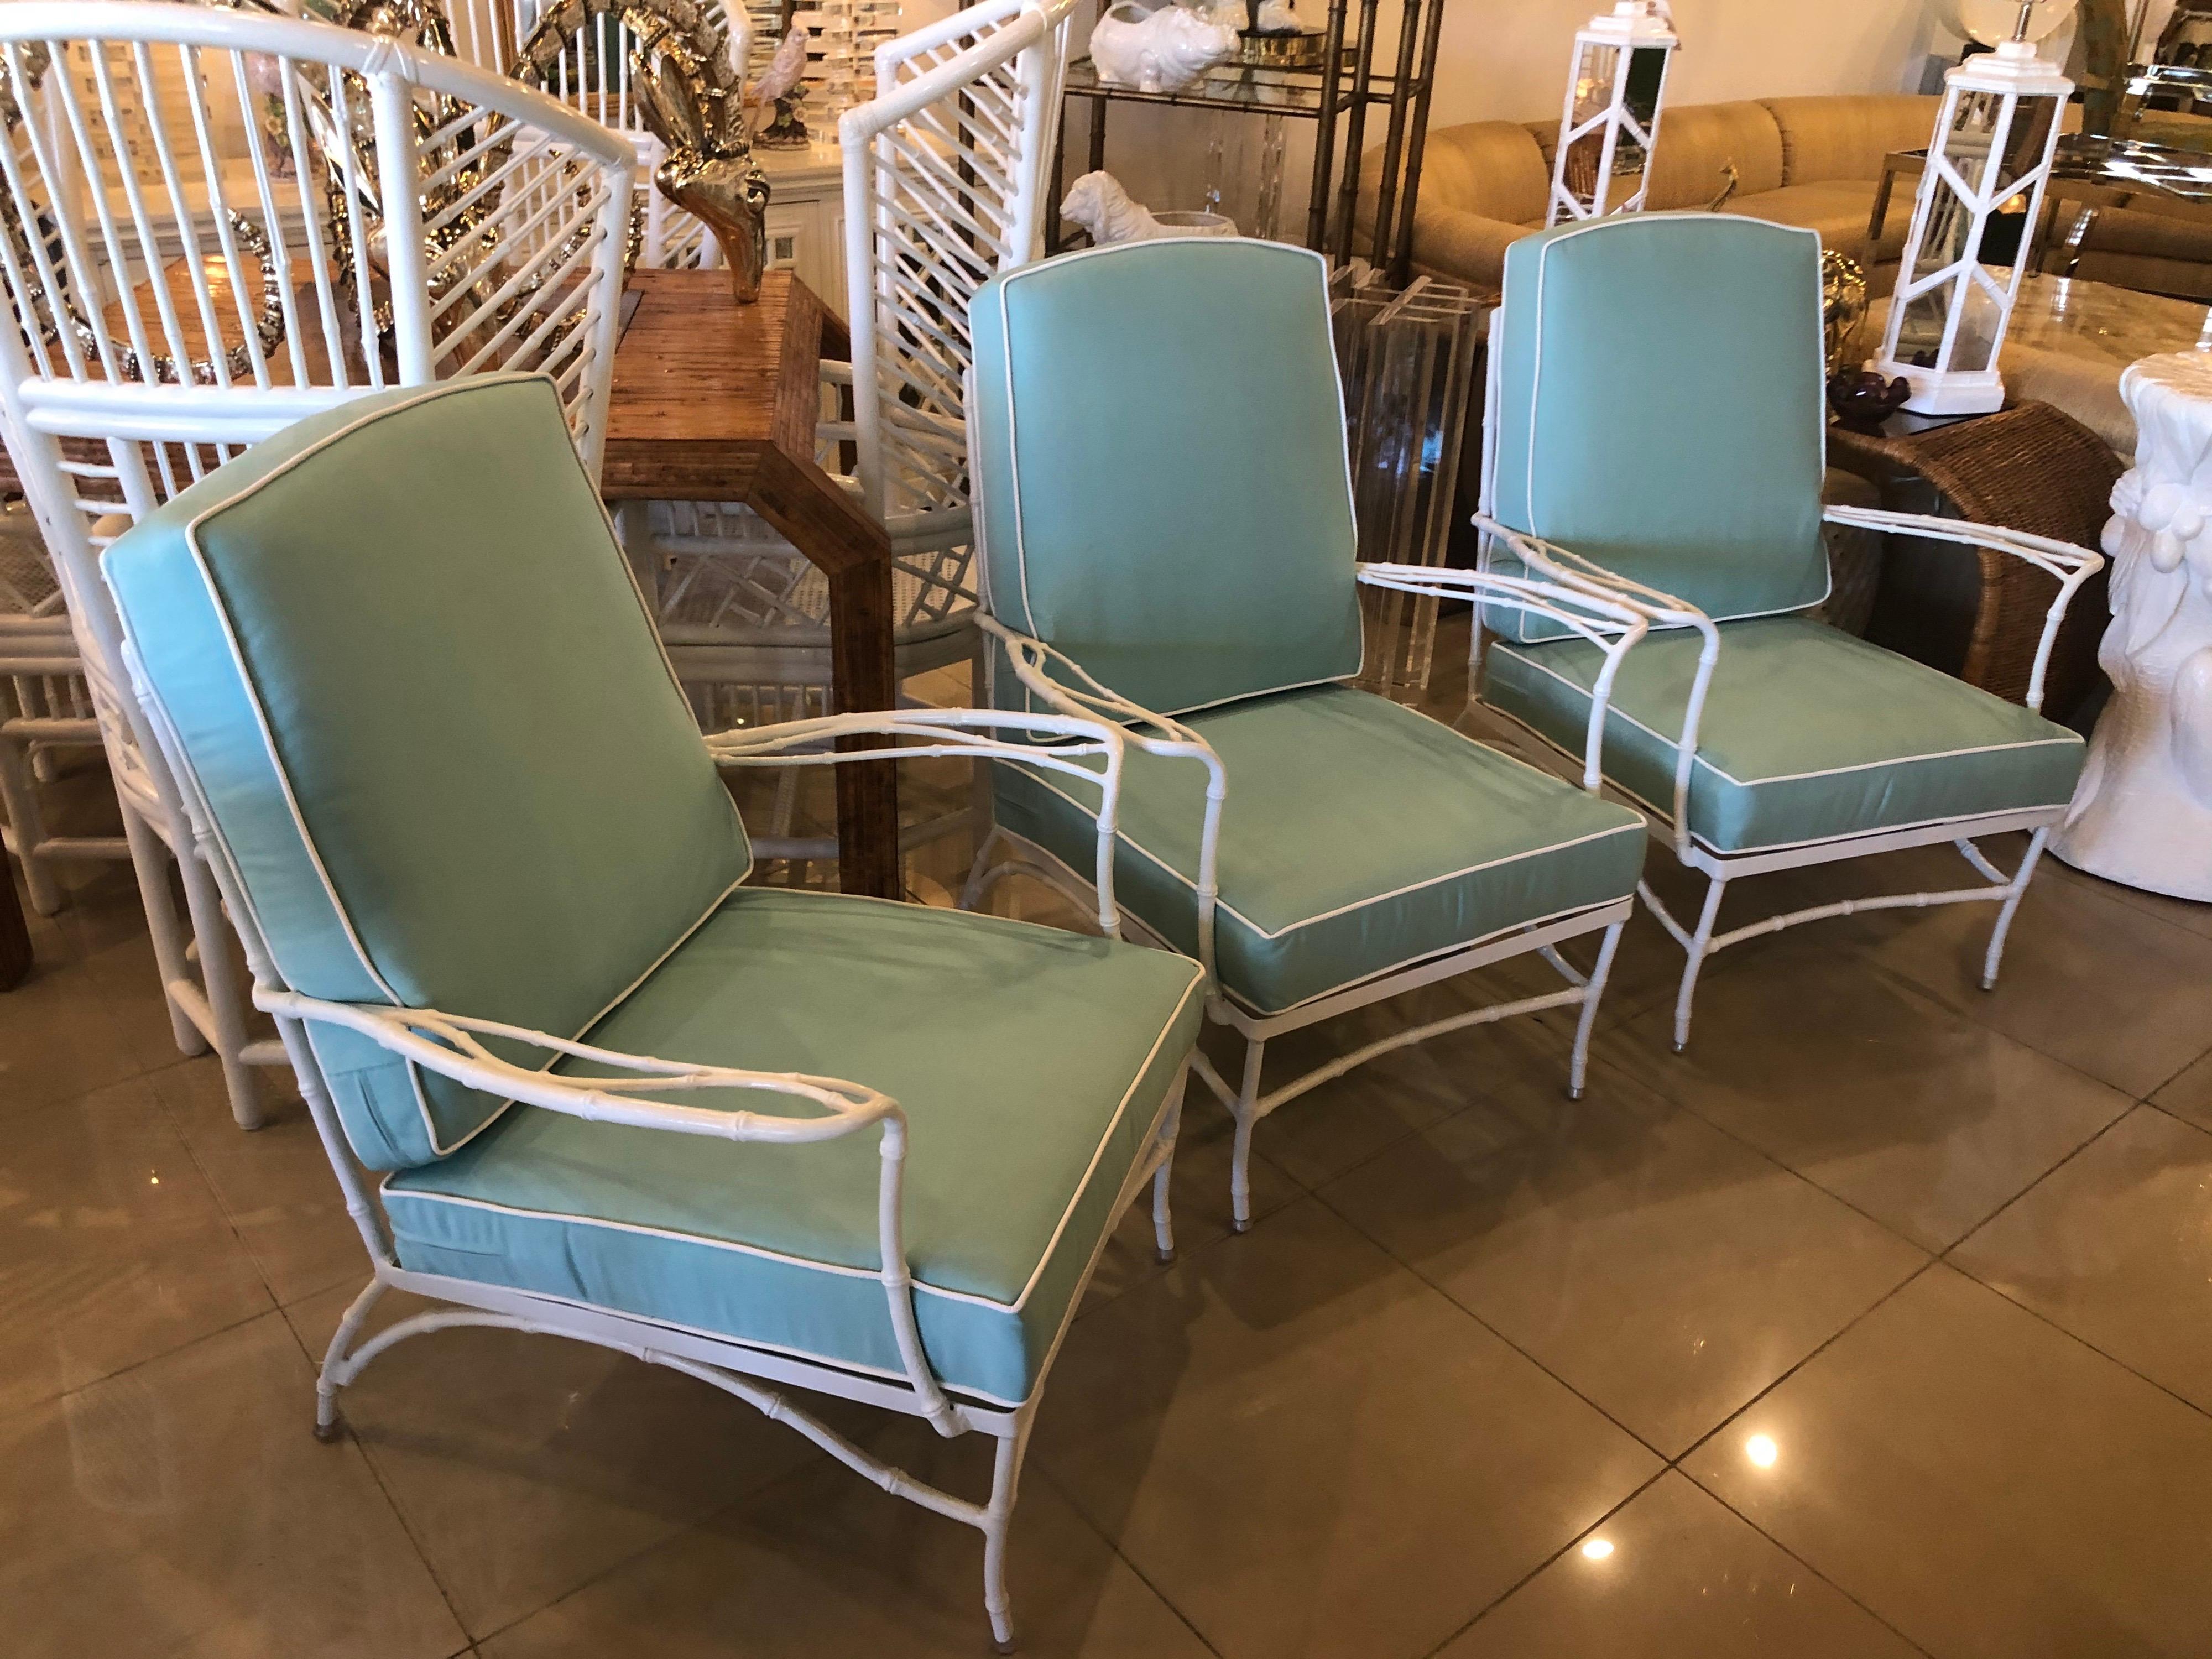 Lovely set of 3 vintage metal, faux bamboo arm chairs, club, lounge for patio, outdoors, sunroom. These have been newly powder-coated in a clean white. All new custom cushions with Sunbrella blue fabric and white trim. 
Back of chair height with